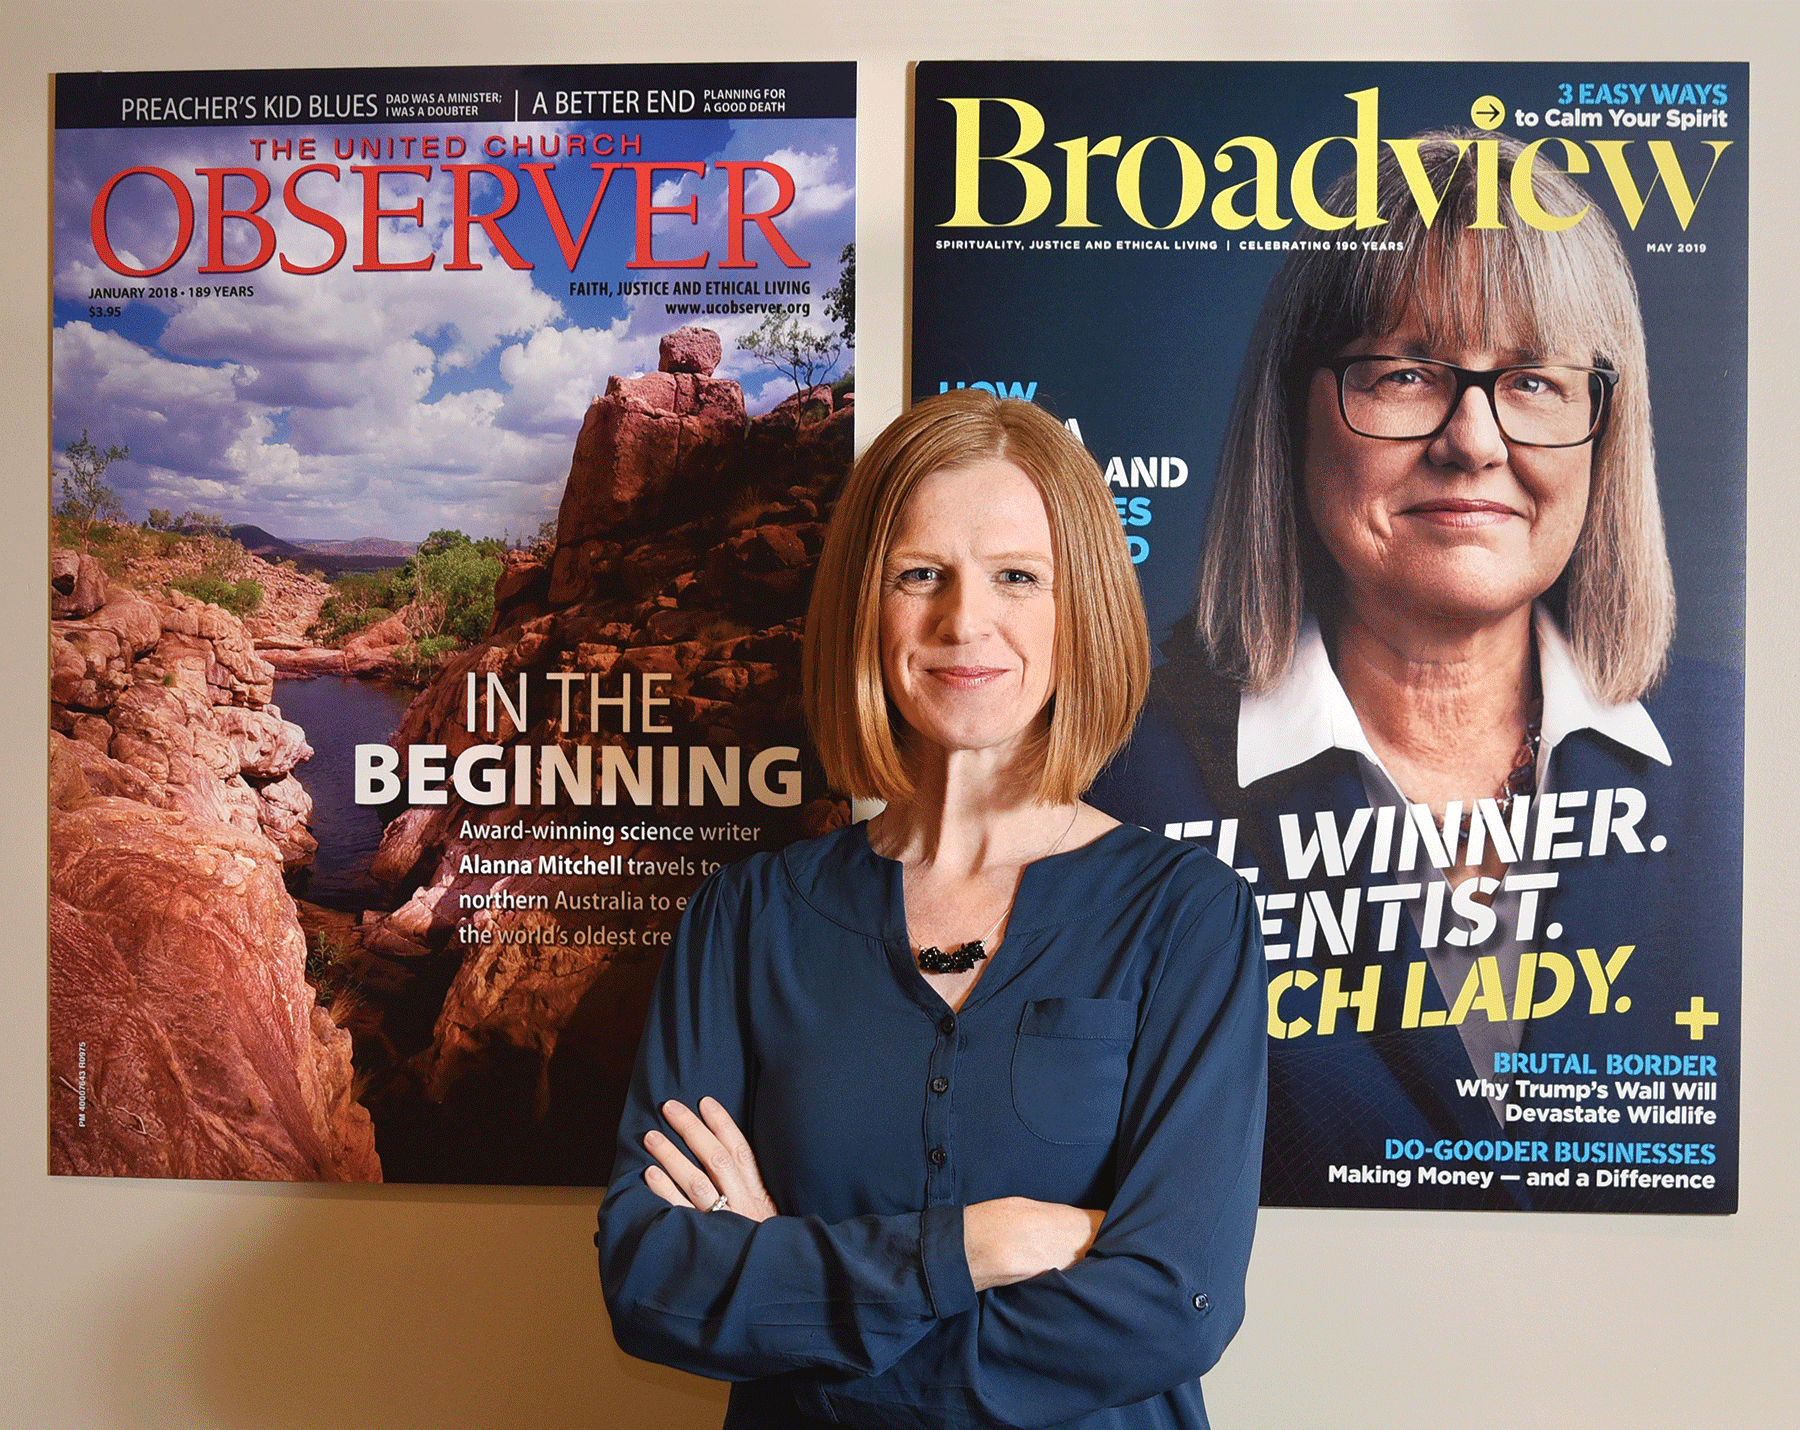 Editor of the Broadview magazine, Jocelyn Bell stands with her arms crossed facing the camera.